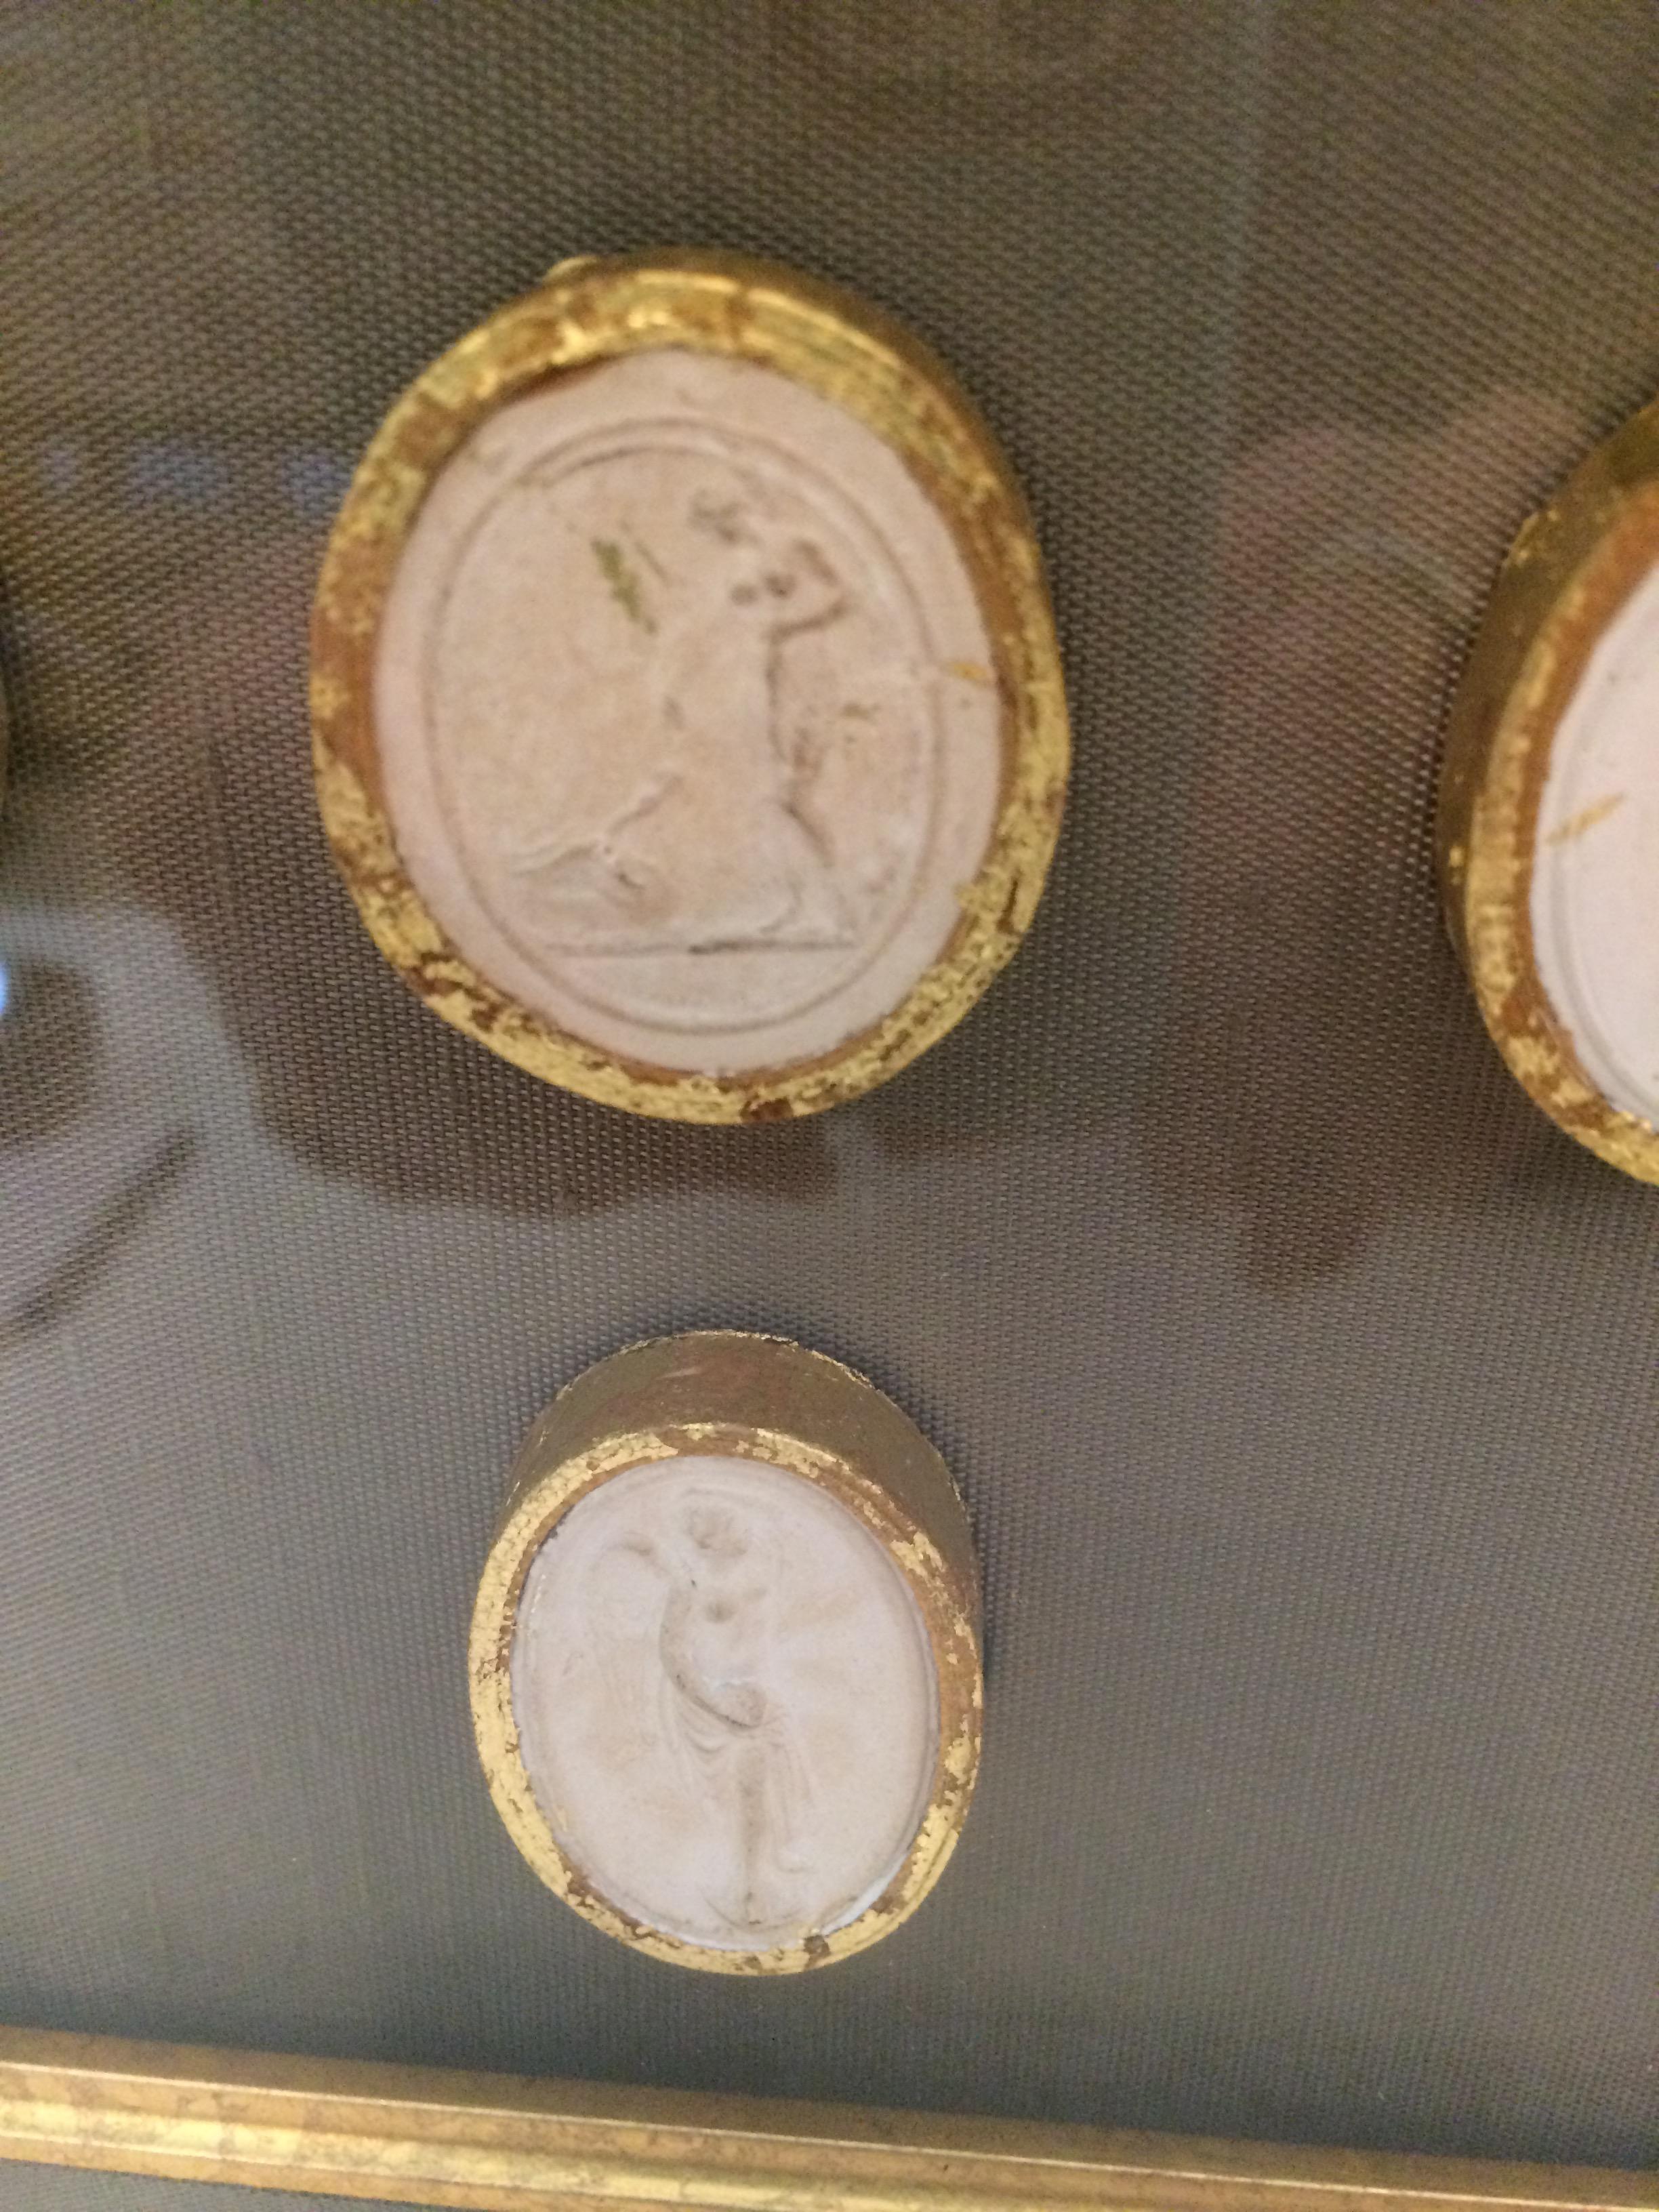 A set of five cream colored coin shaped intaglios encased in gold leaf and beautifully framed against a taupe silk background, double matted with gold leaf and a gilded frame.